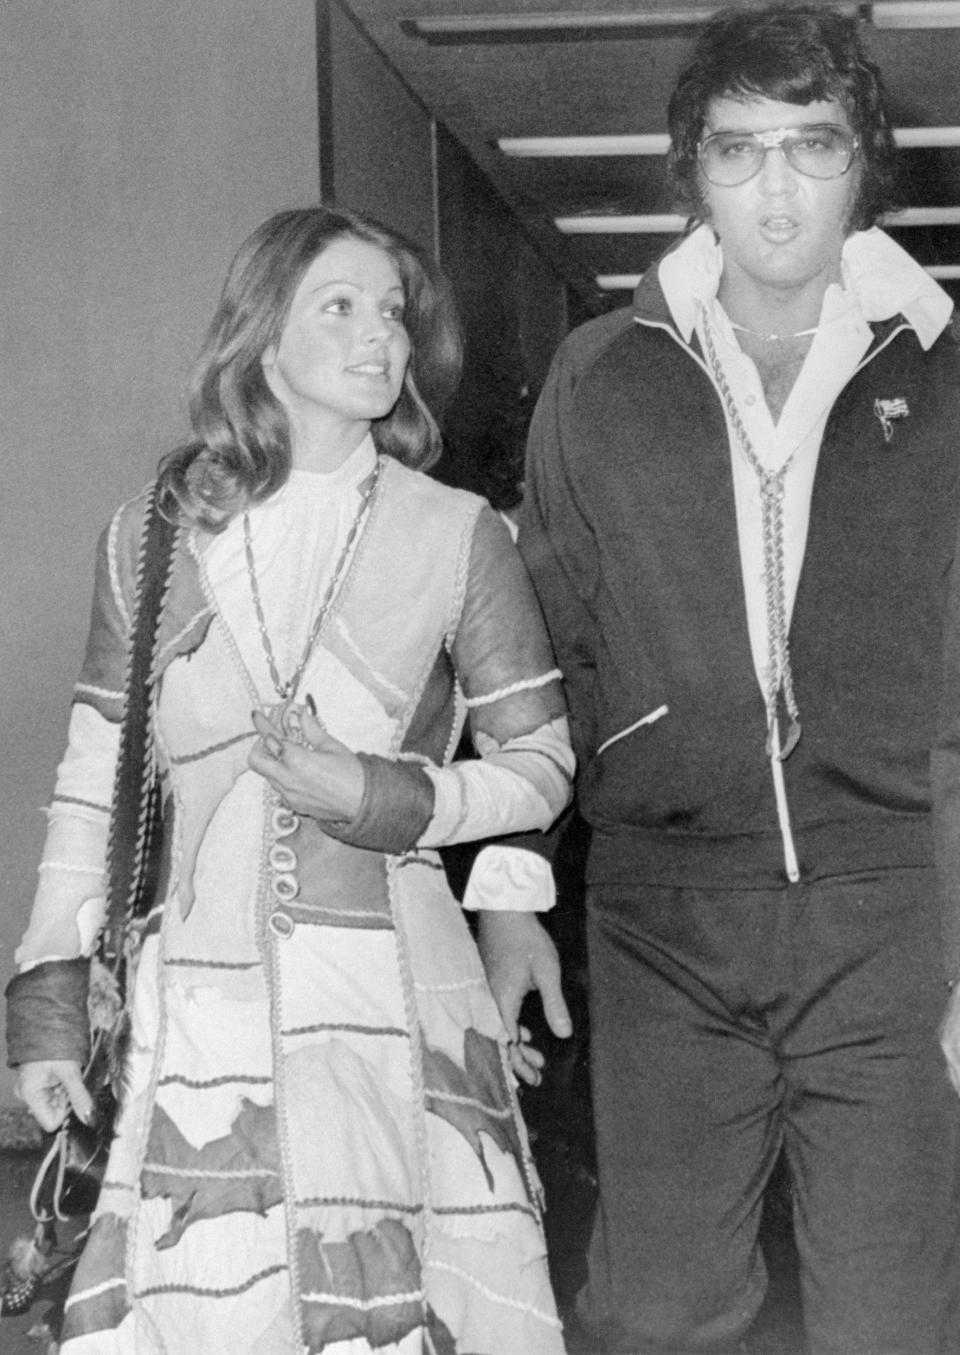 She and Elvis both shifted to a more bohemian look at the start of the Seventies